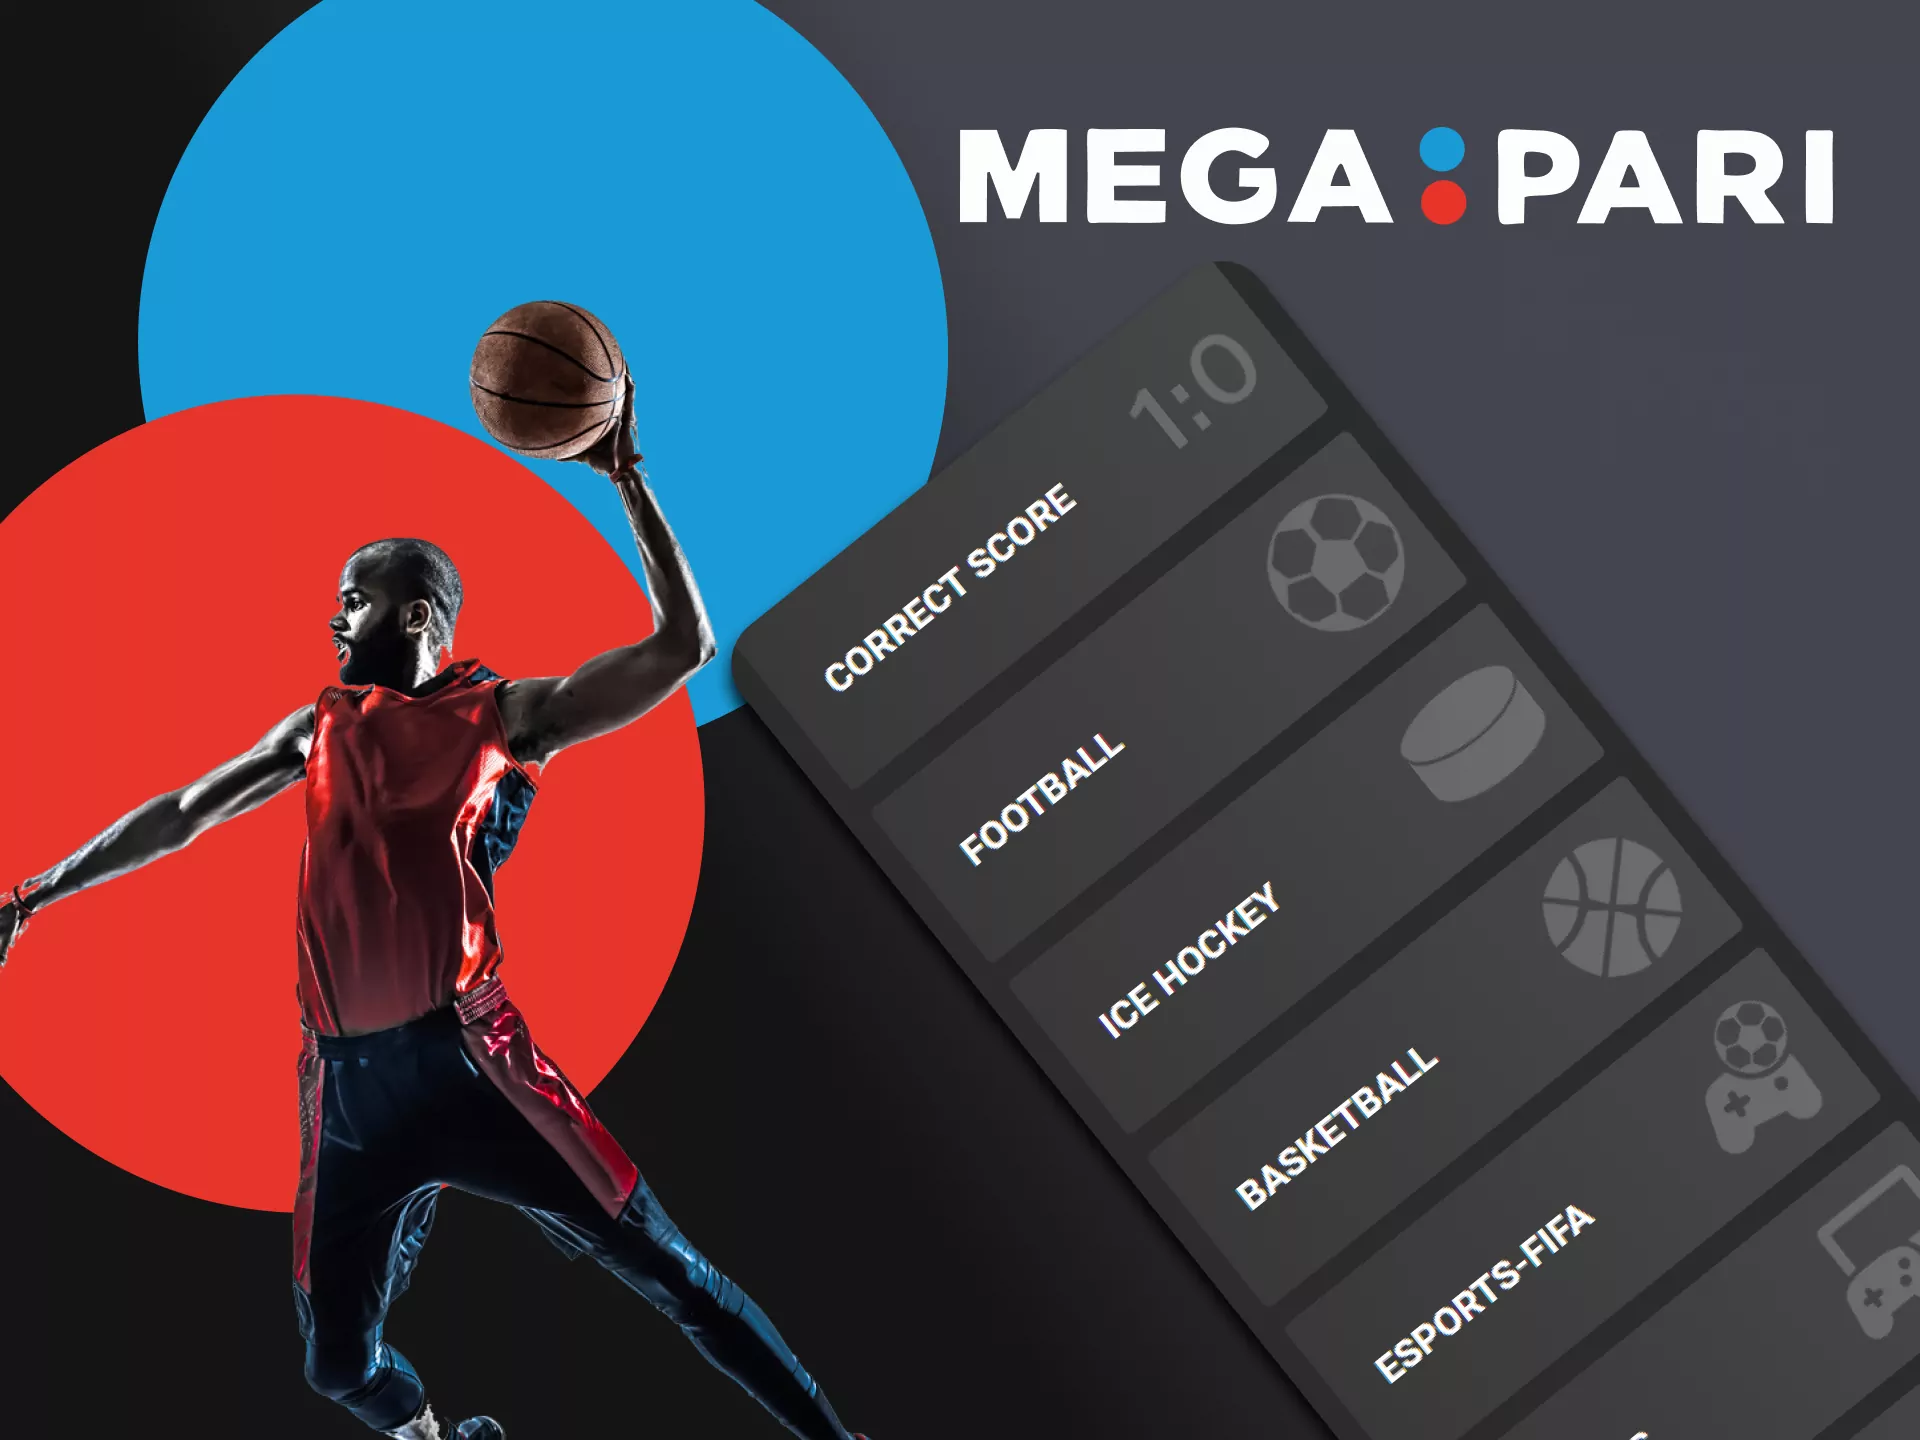 Find out which sports you can bet on in TOTO with Megapari.